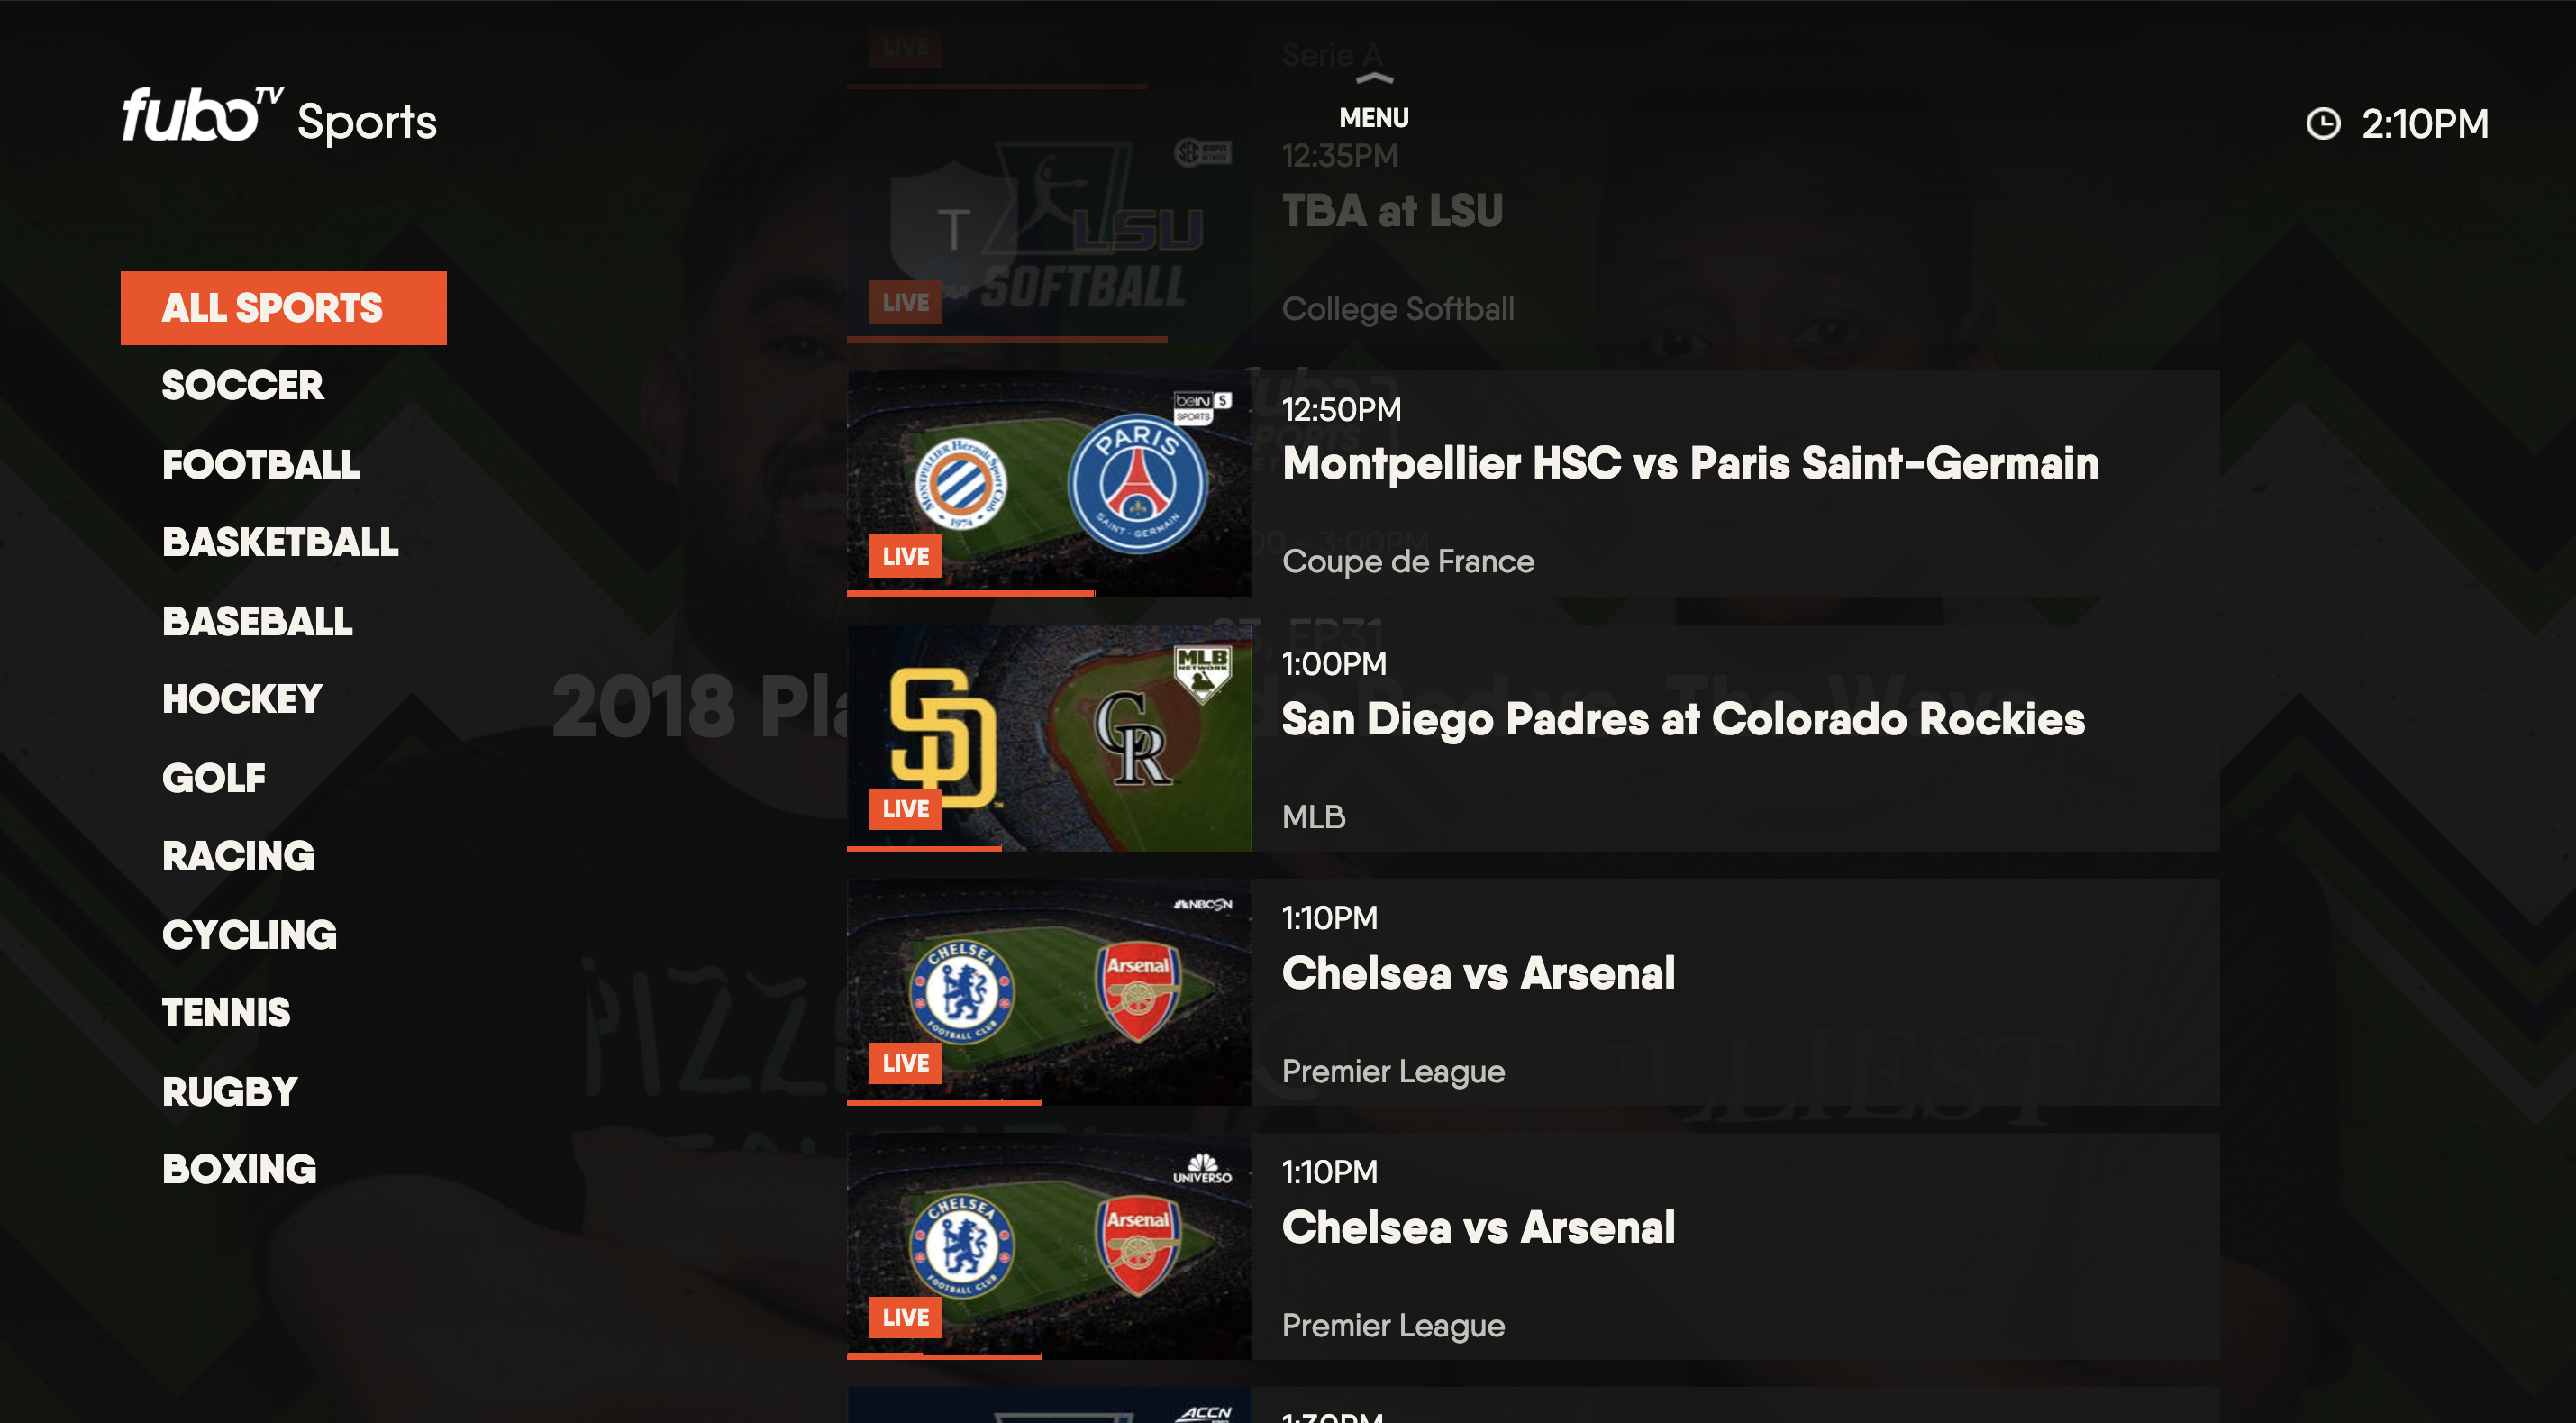 SPORTS screen for the FuboTV app on LG TV with individual sports filters highlighted